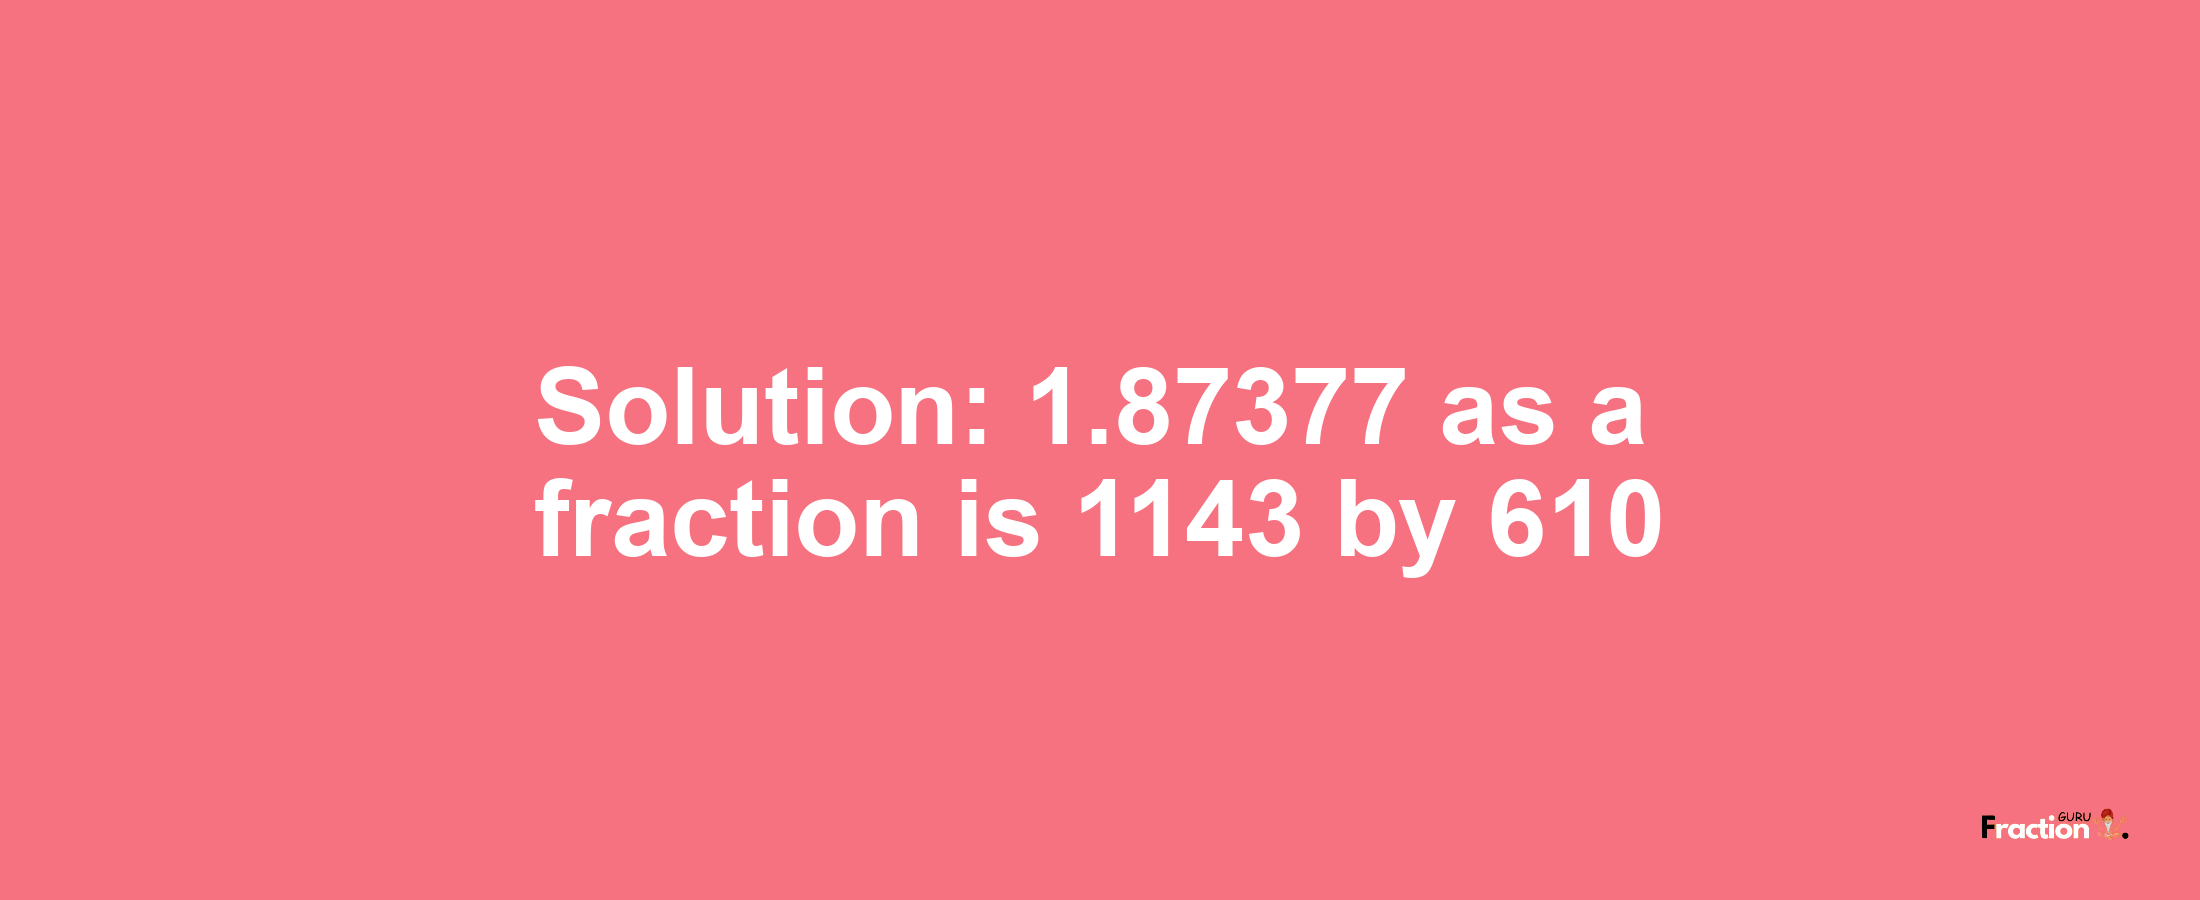 Solution:1.87377 as a fraction is 1143/610